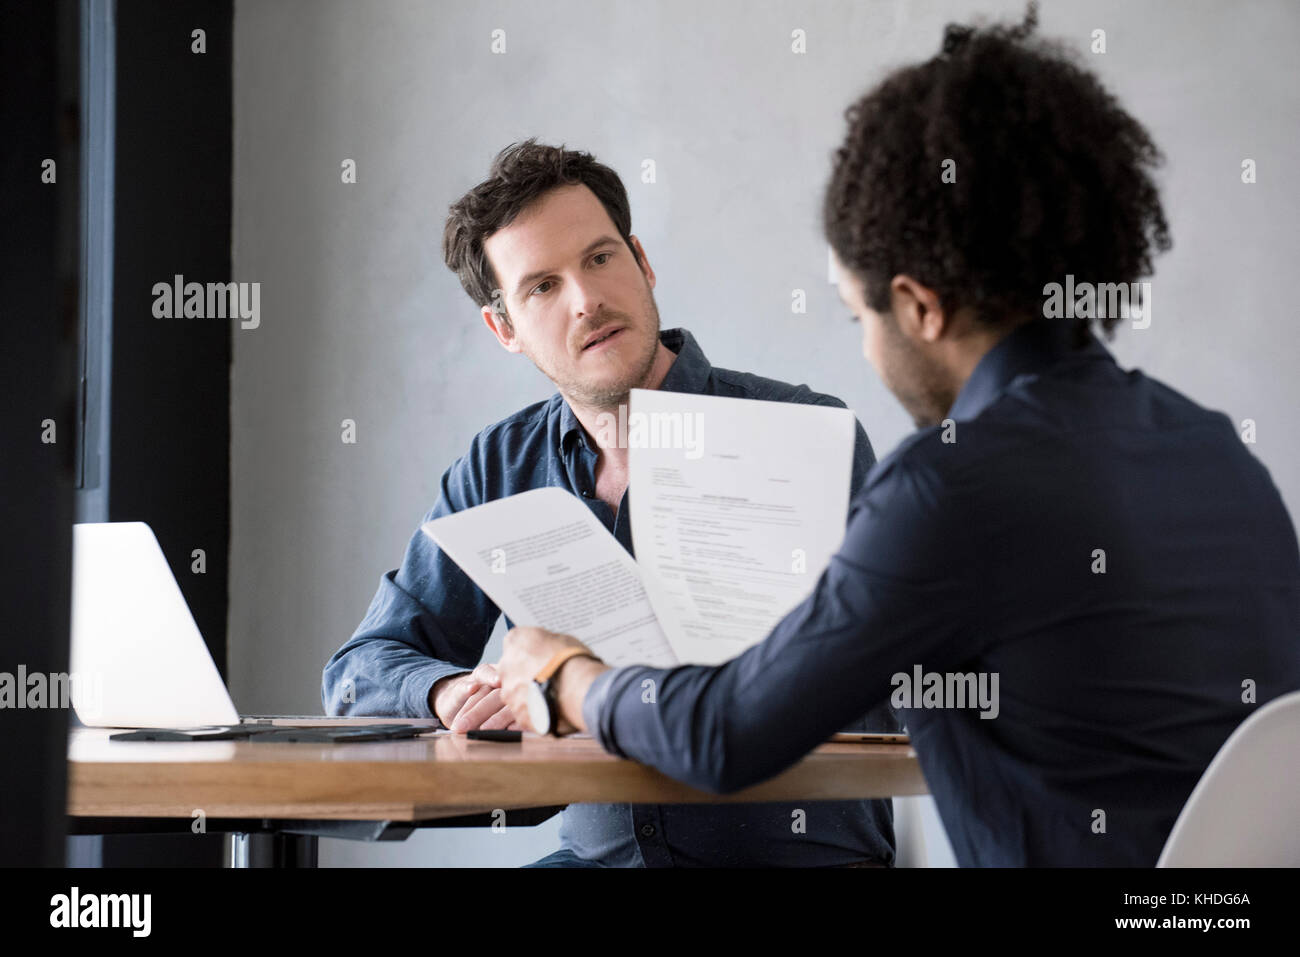 Men reviewing and discussing document Stock Photo